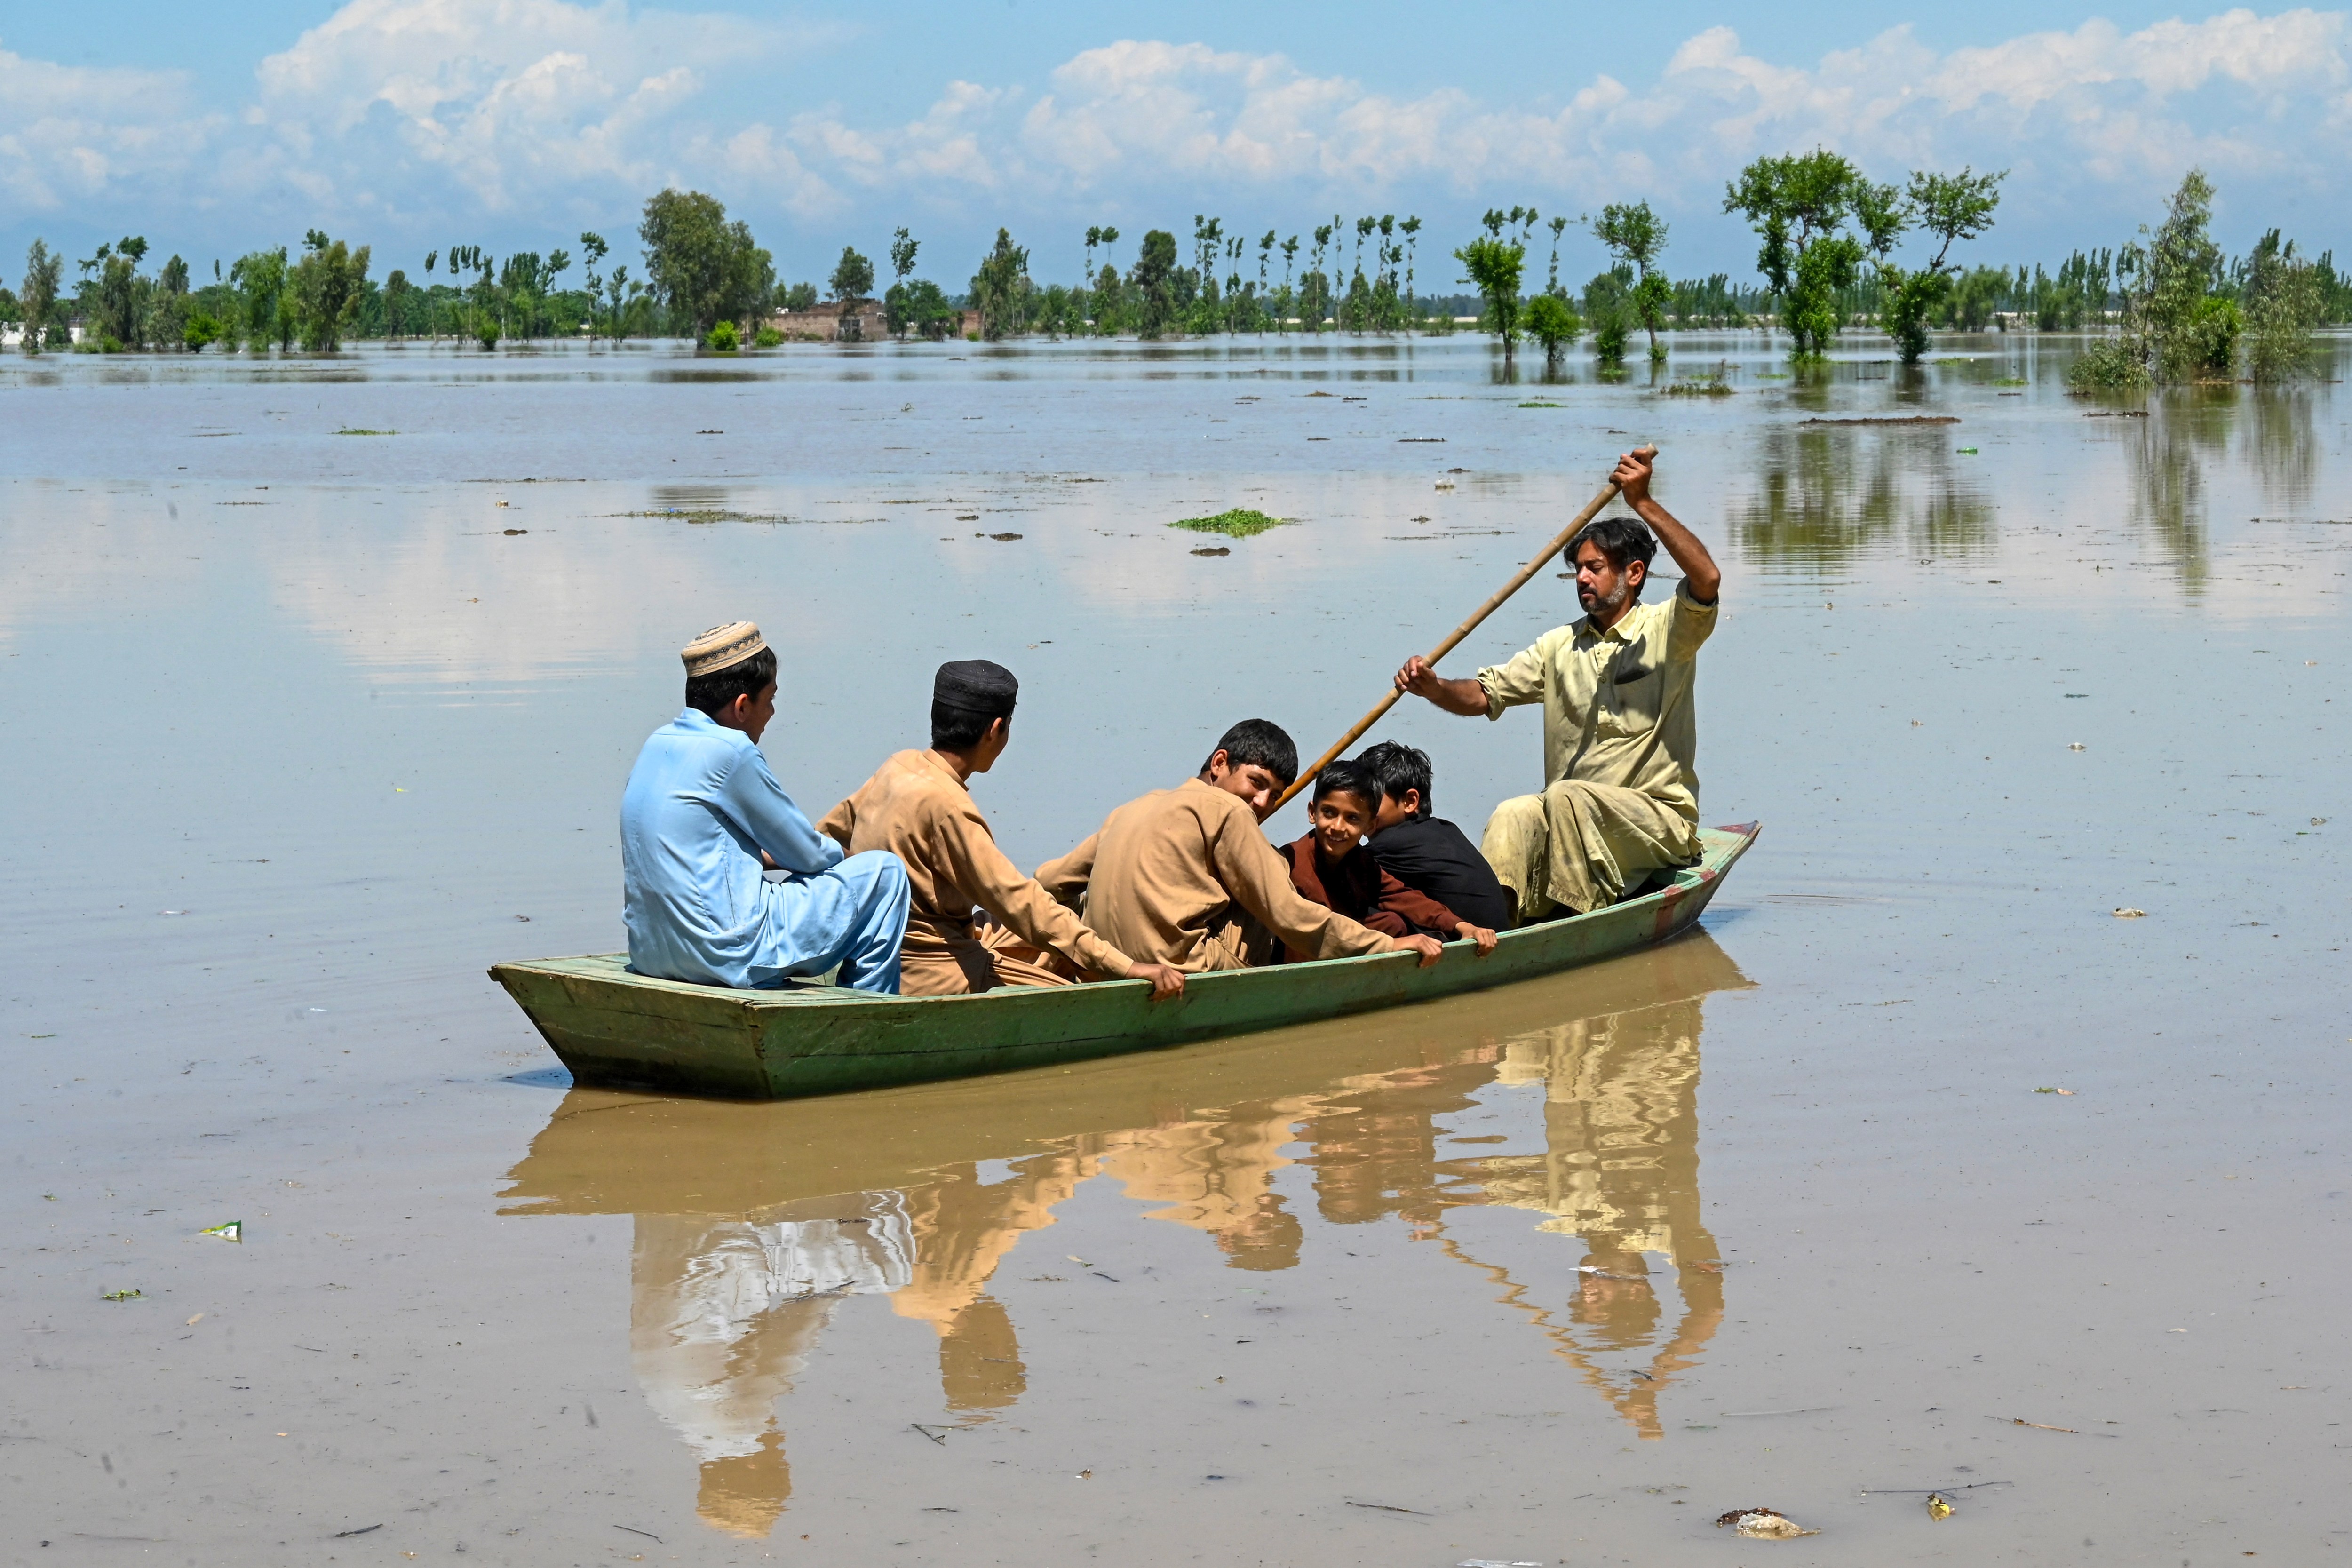 Villagers cross a flooded area in the northern province of Khyber-Pakhtunkhwa in Pakistan. Heavy rain and lightning across the country have killed at least 50 people in the past three days, with authorities declaring a state of emergency in some regions